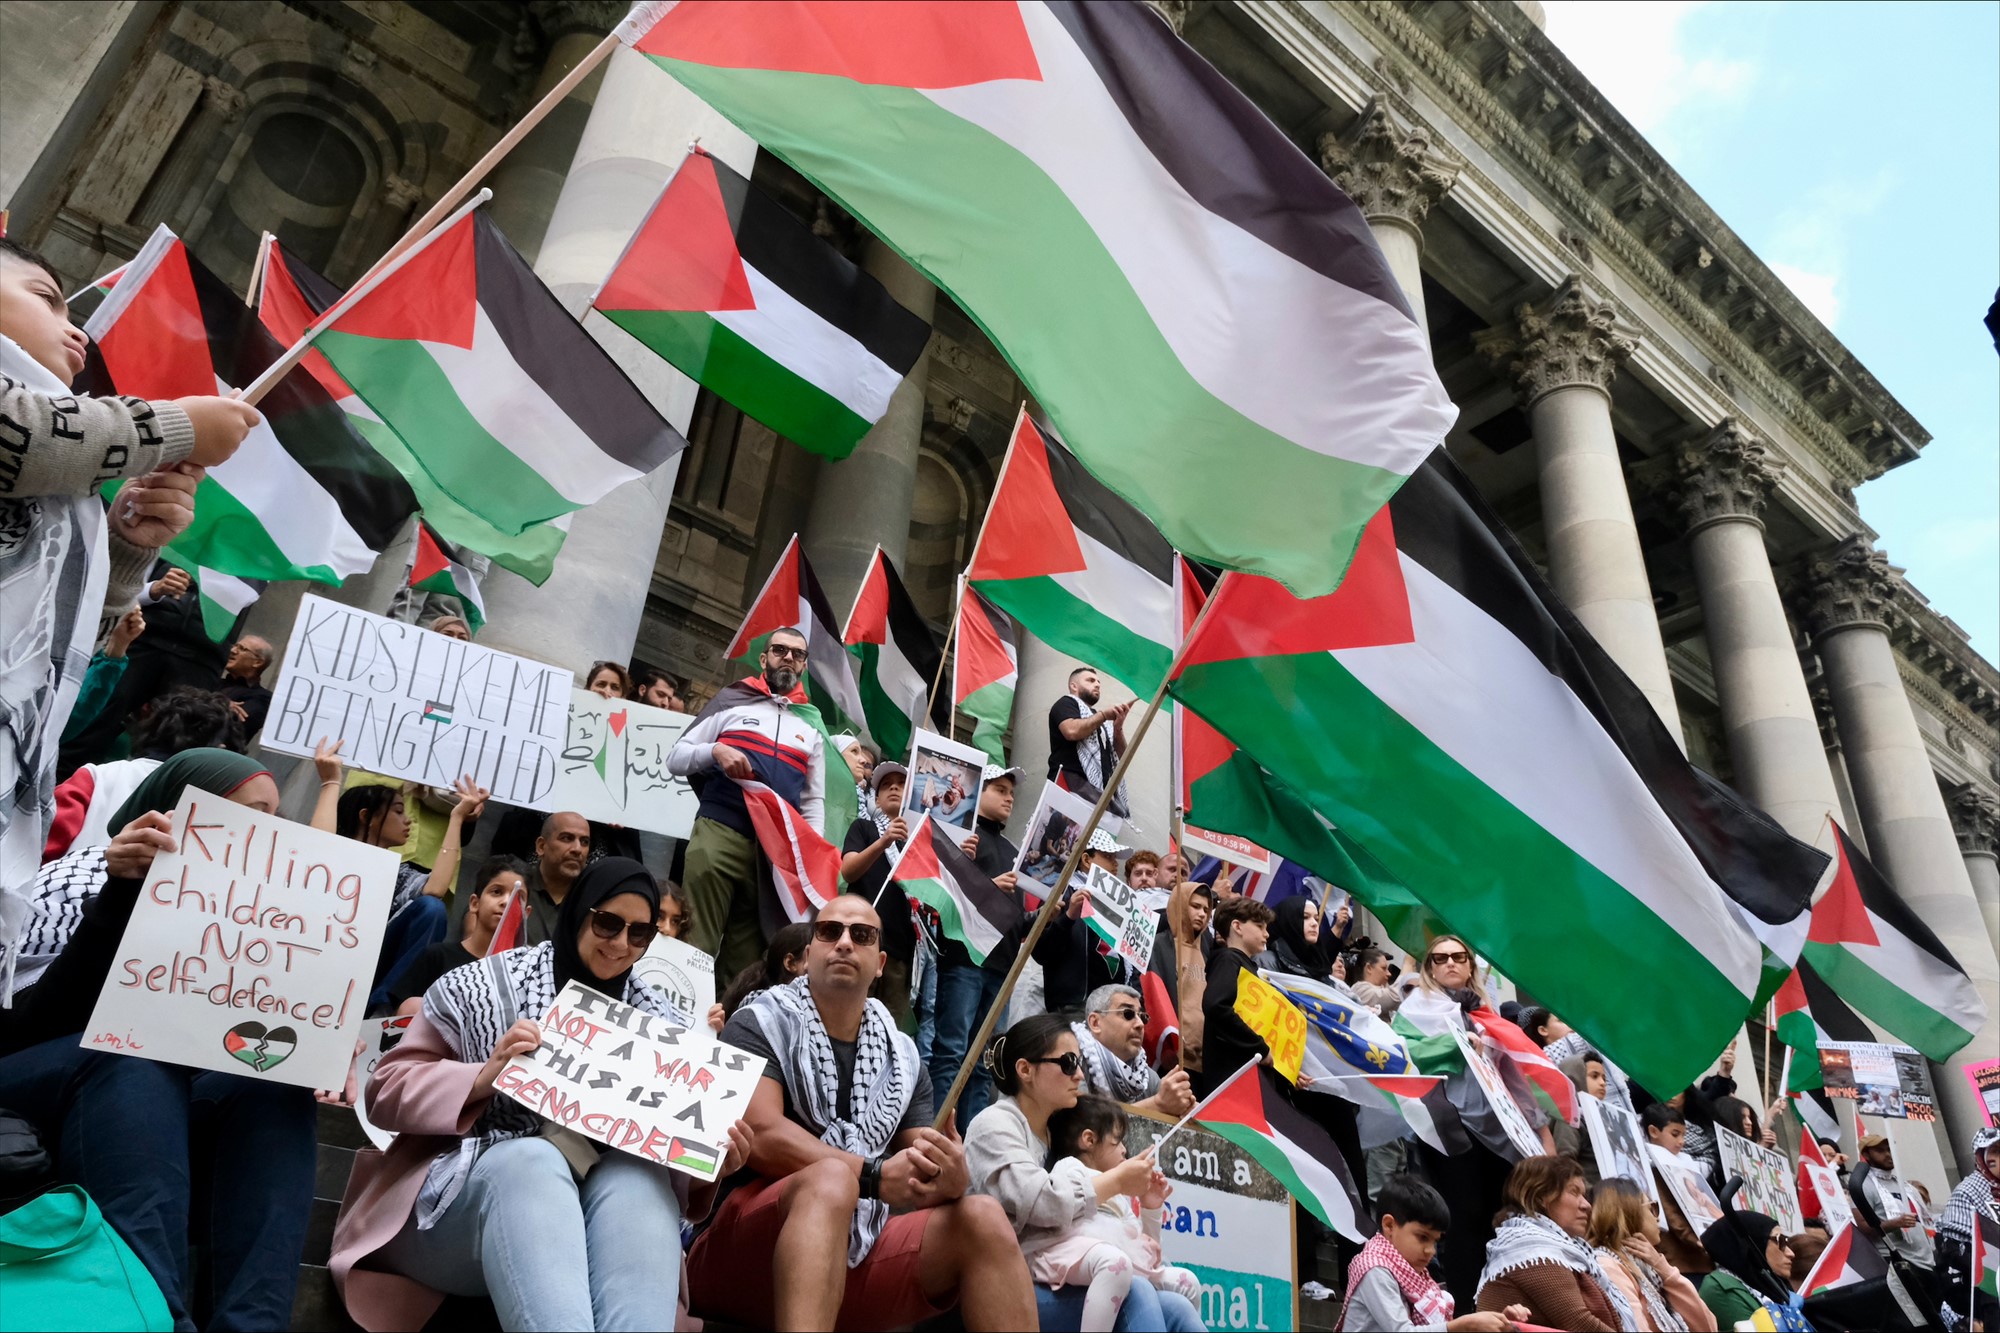 A large group of people carrying signs and Palestinian flags sit on the steps of a stone building.